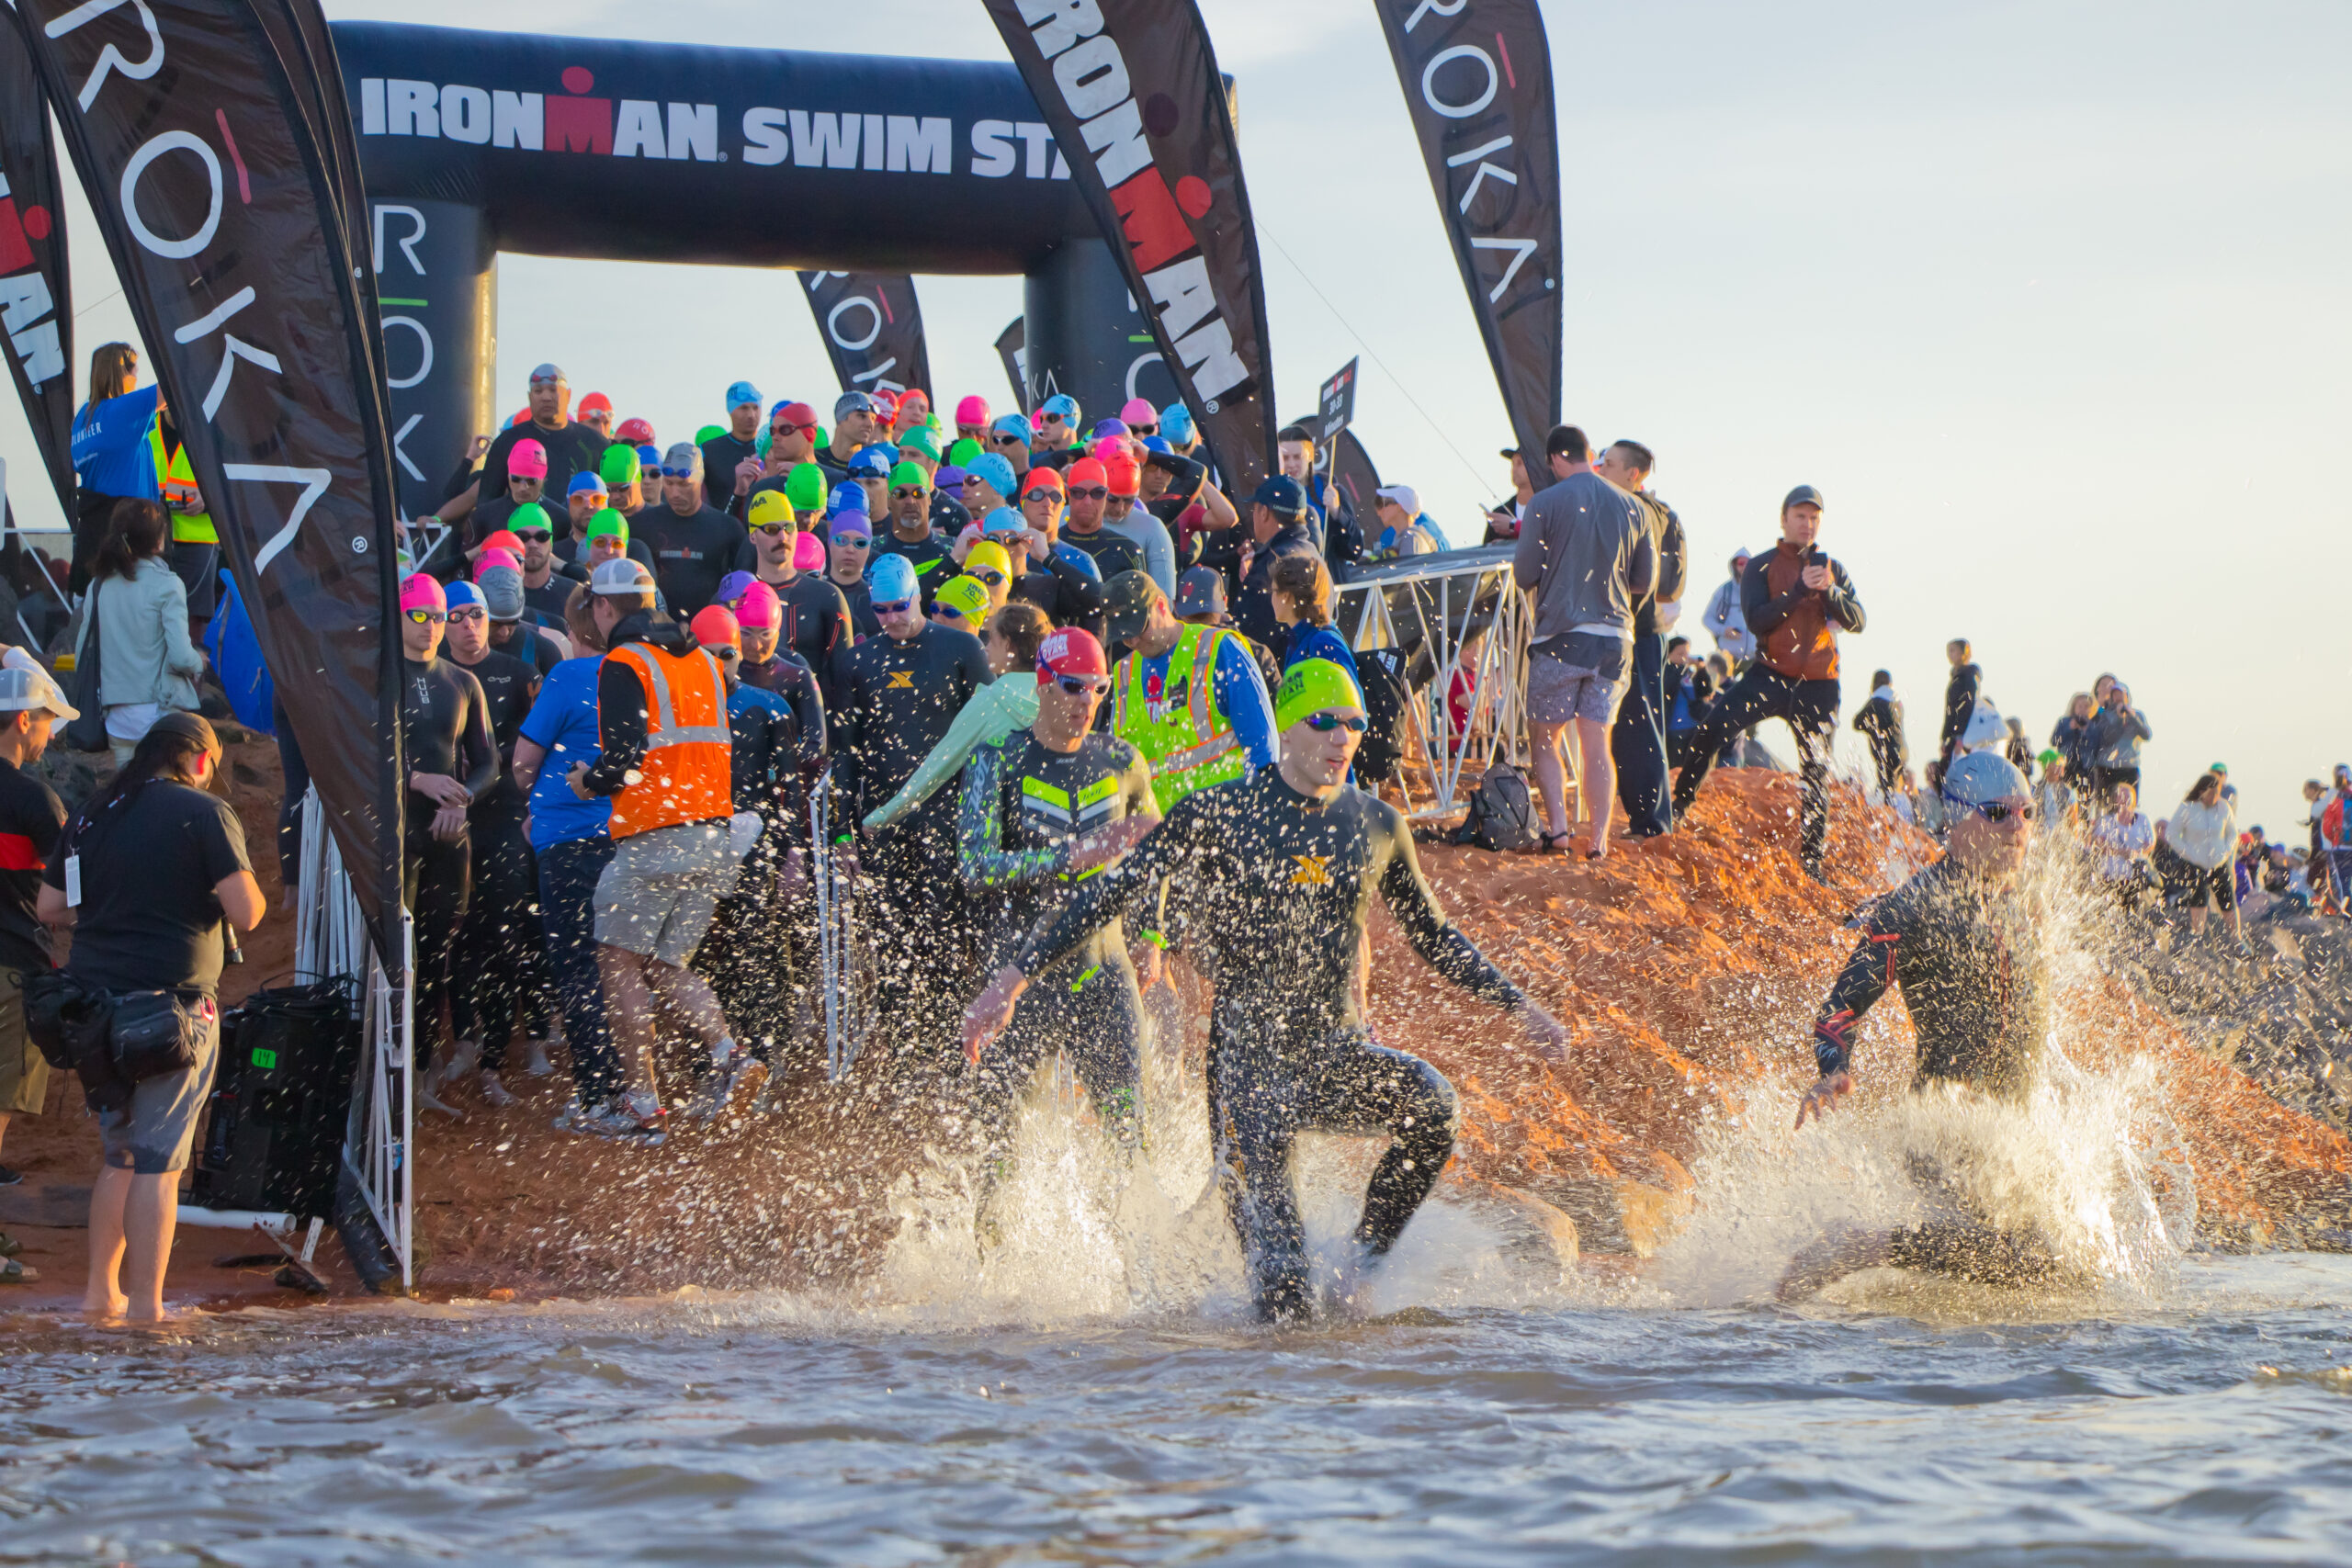 St. selected to host 2022 Ironman North American Championship